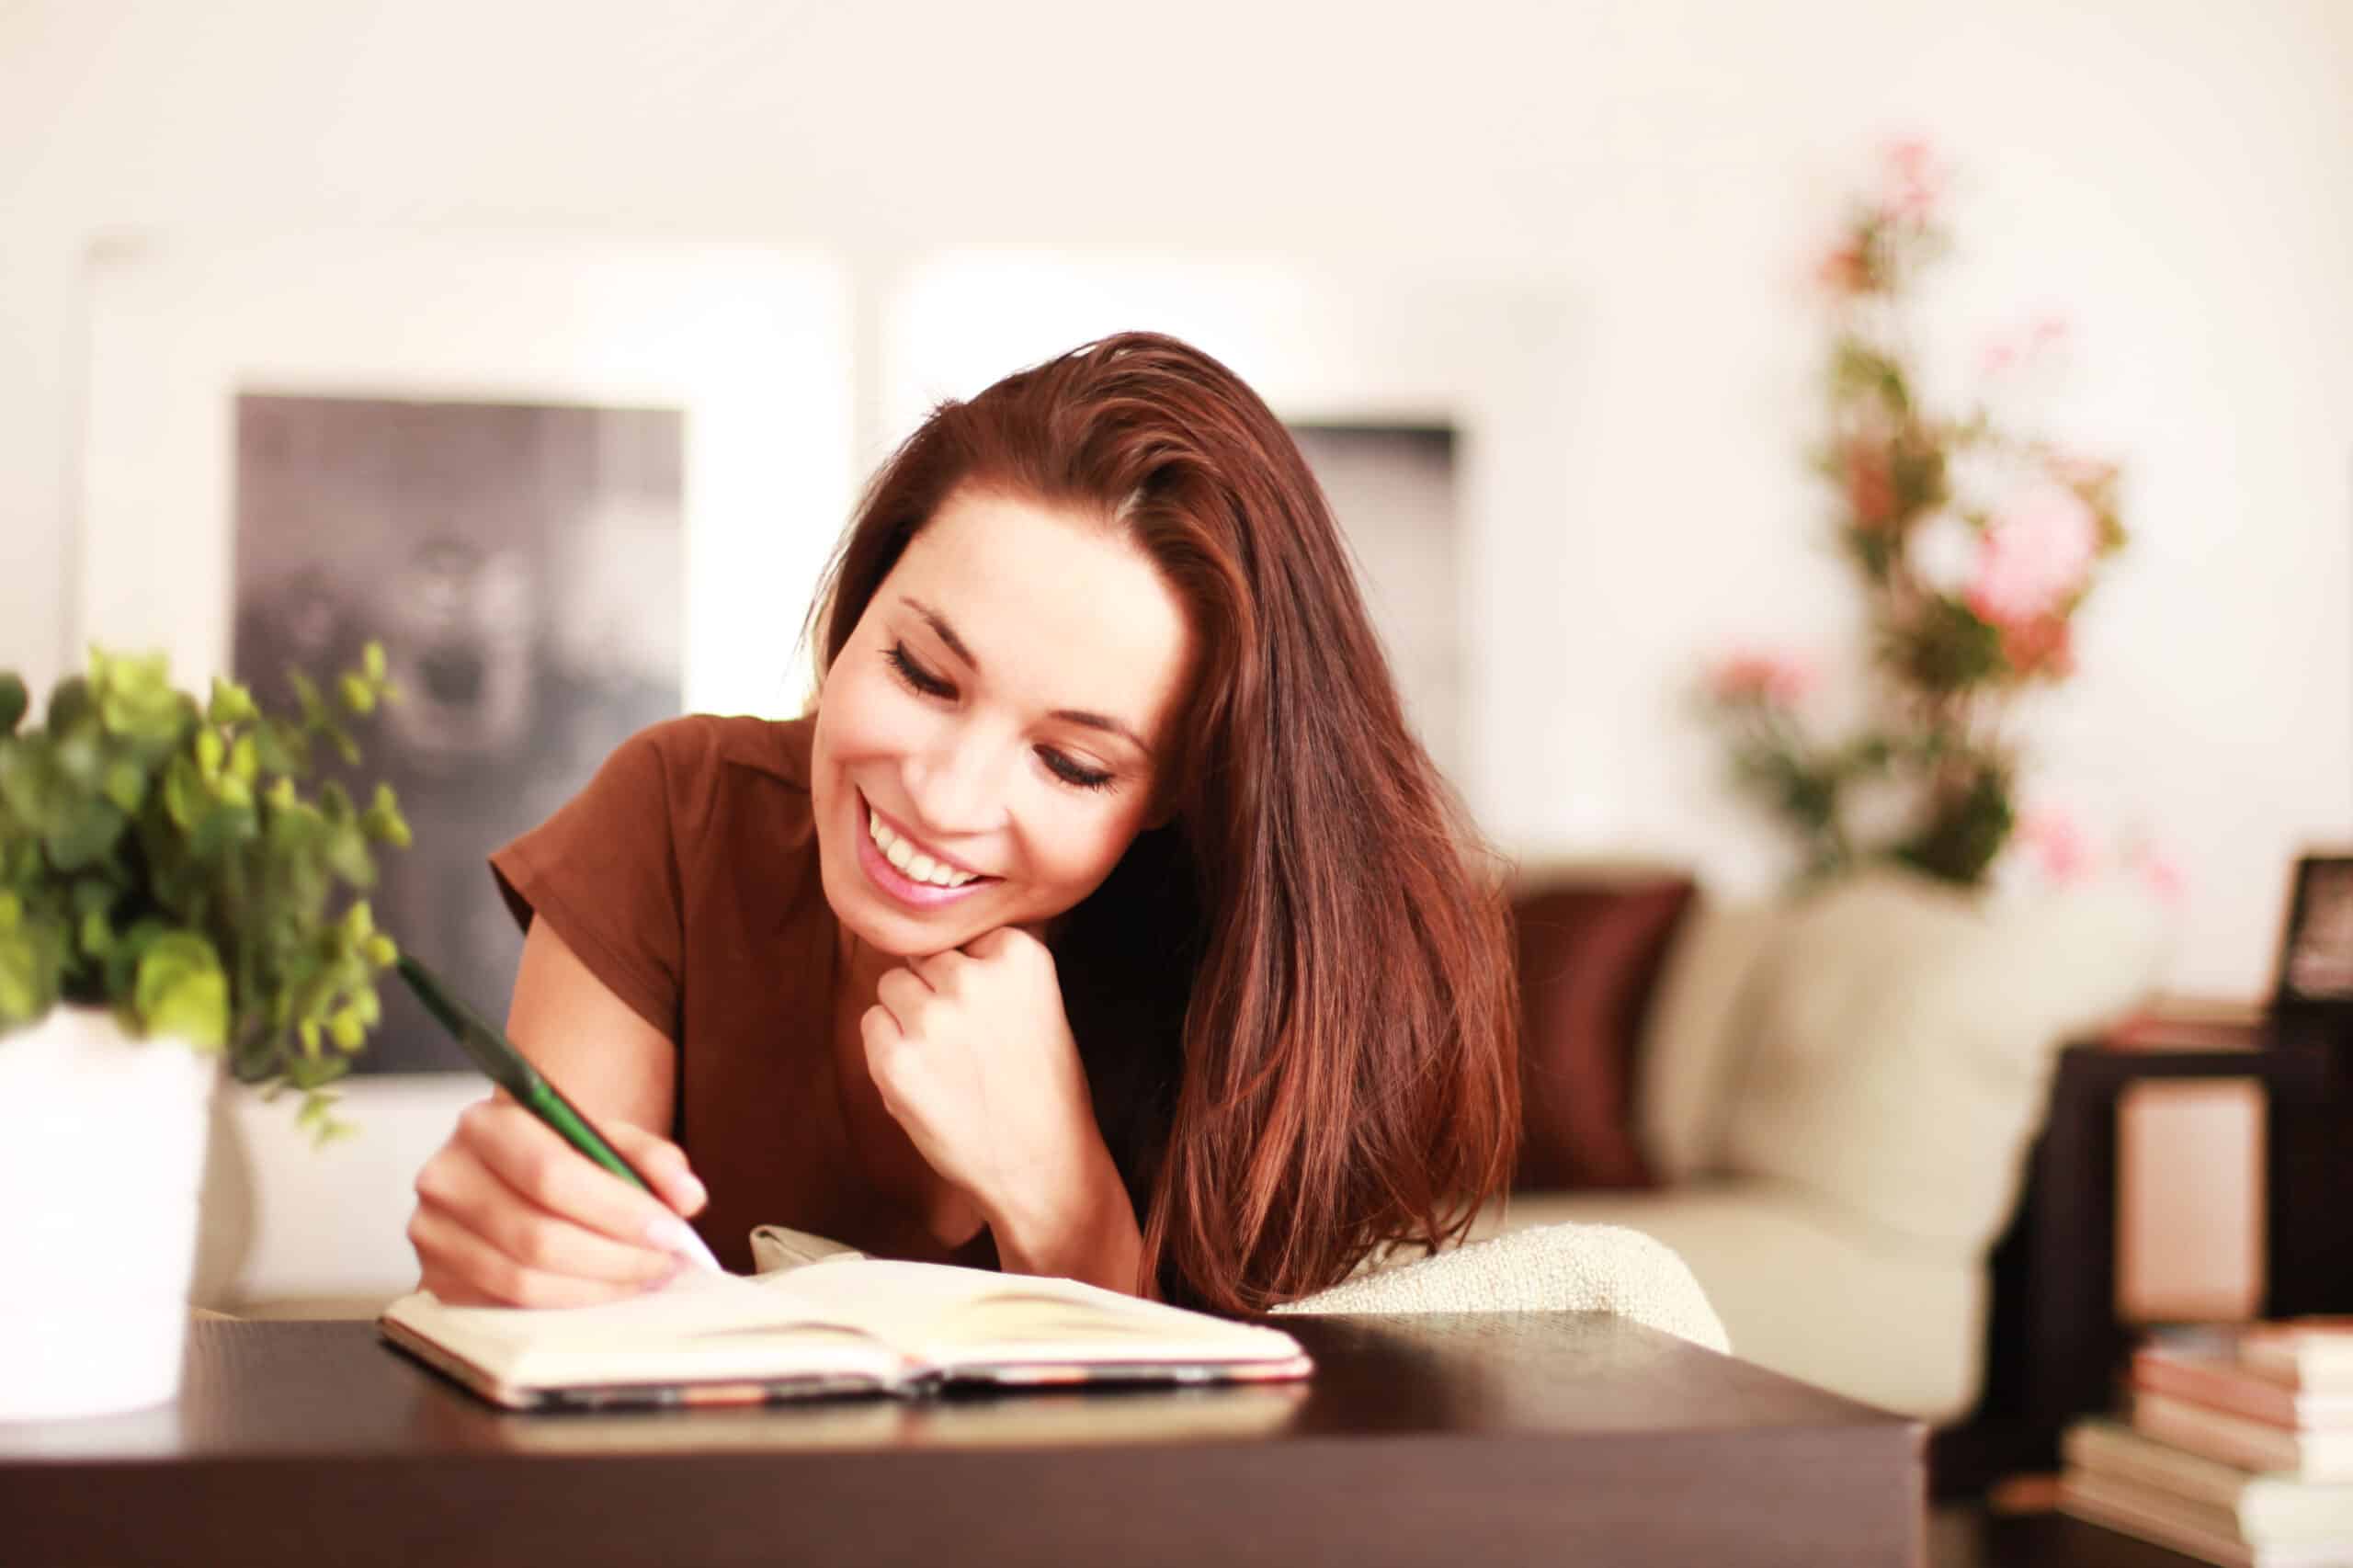 redhead lady writing on table at home smiling